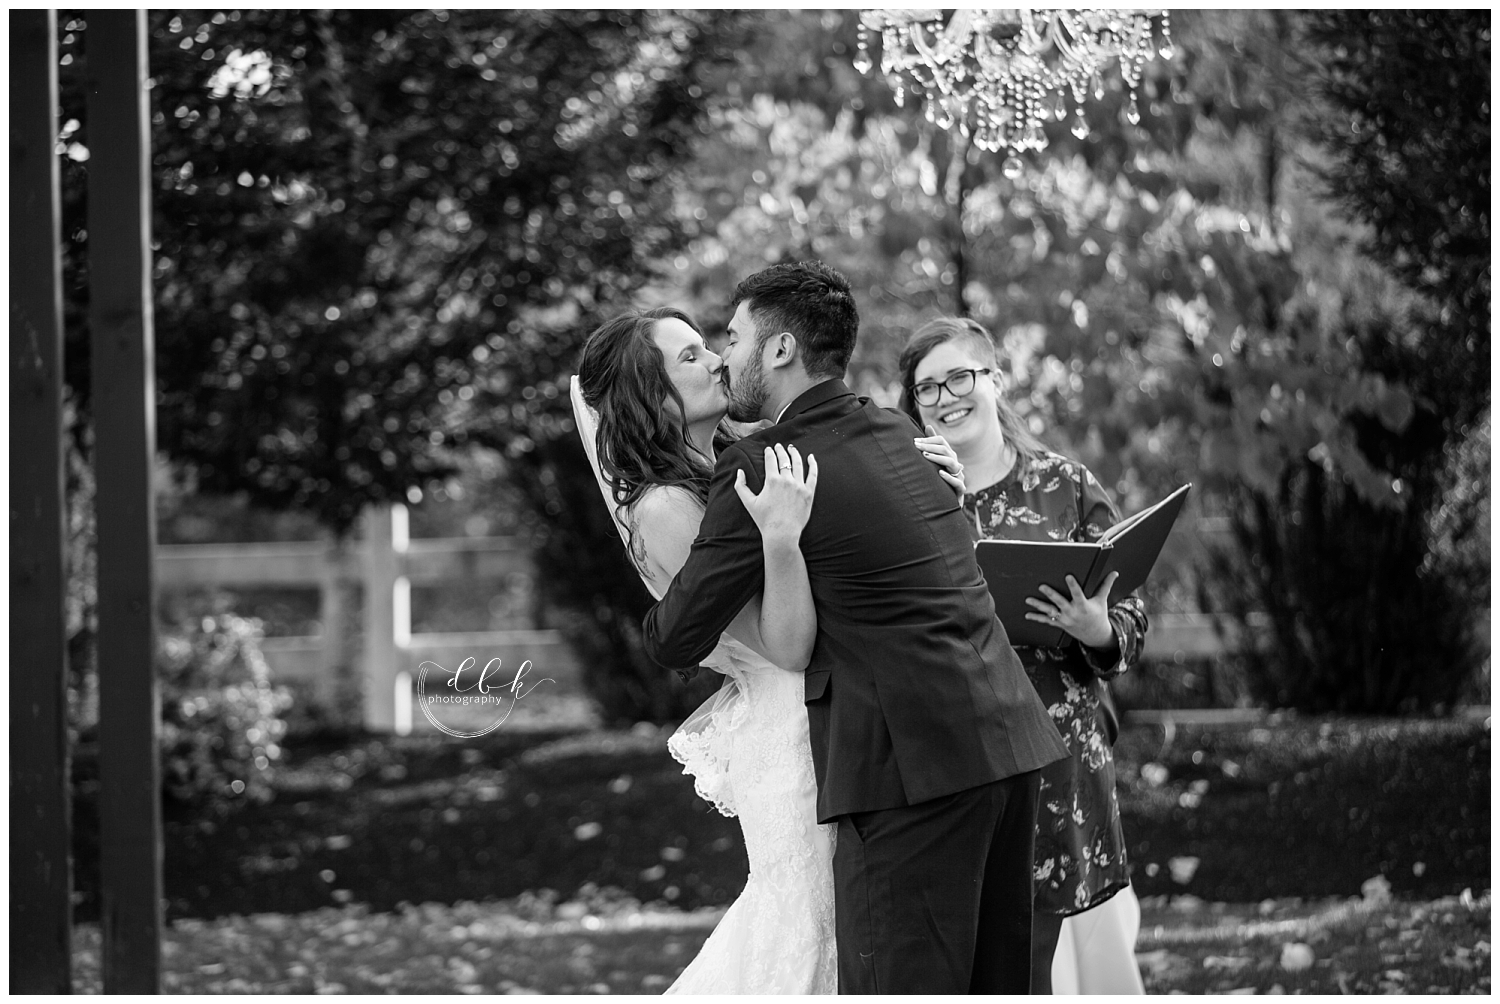 bride and groom's first kiss at fall wedding ceremony at Filigree Farm in Buckley, Washington